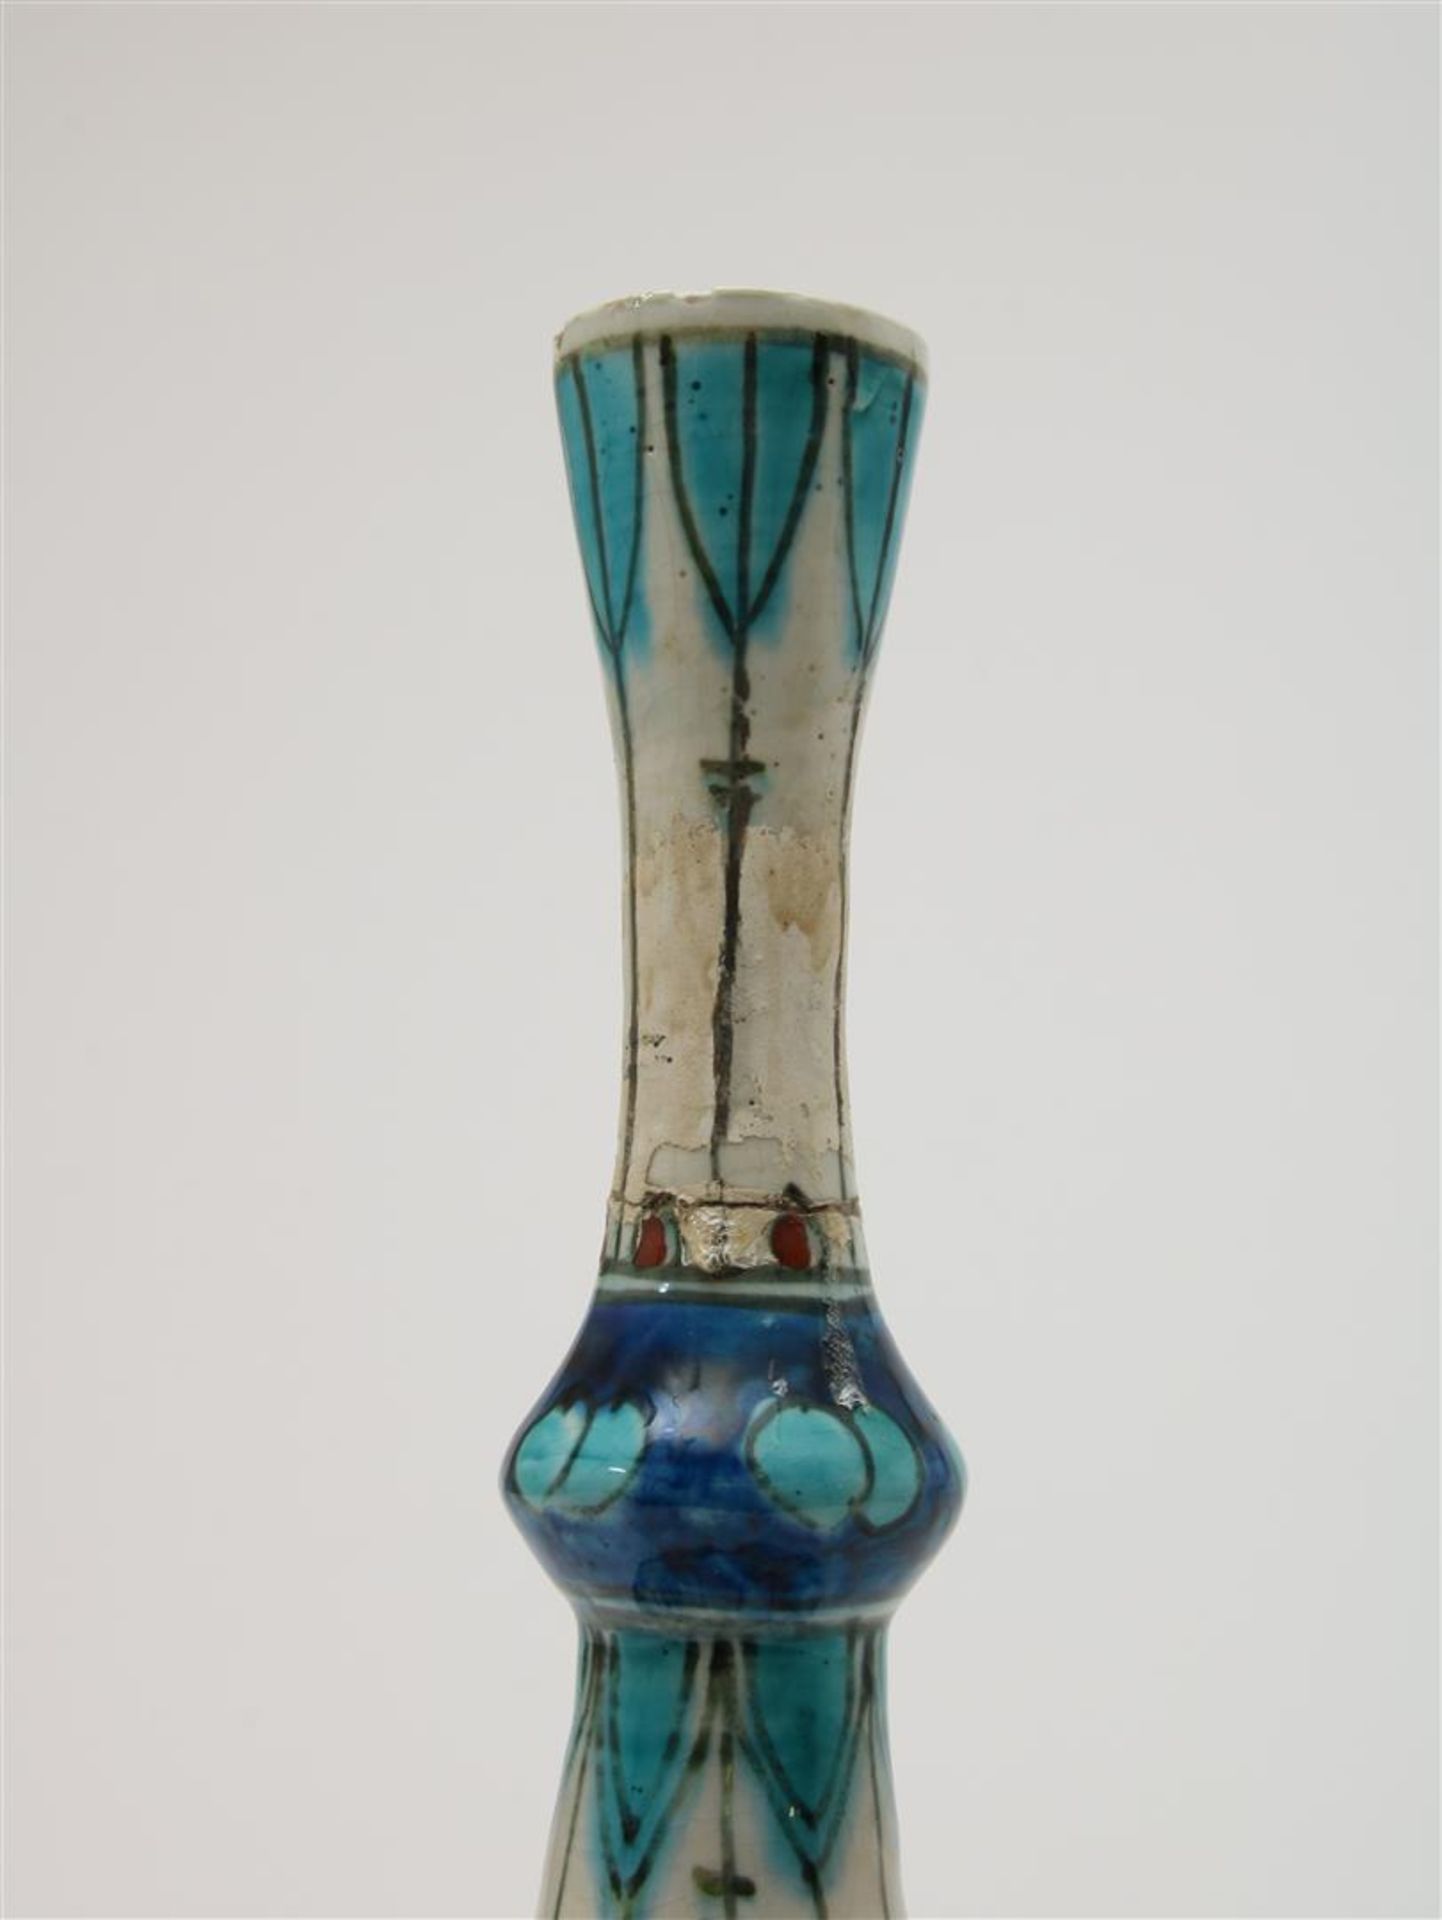 Polychrome earthenware 'New Delft' or 'Iznik' vase with narrow neck and Persian flower decor. - Image 6 of 8